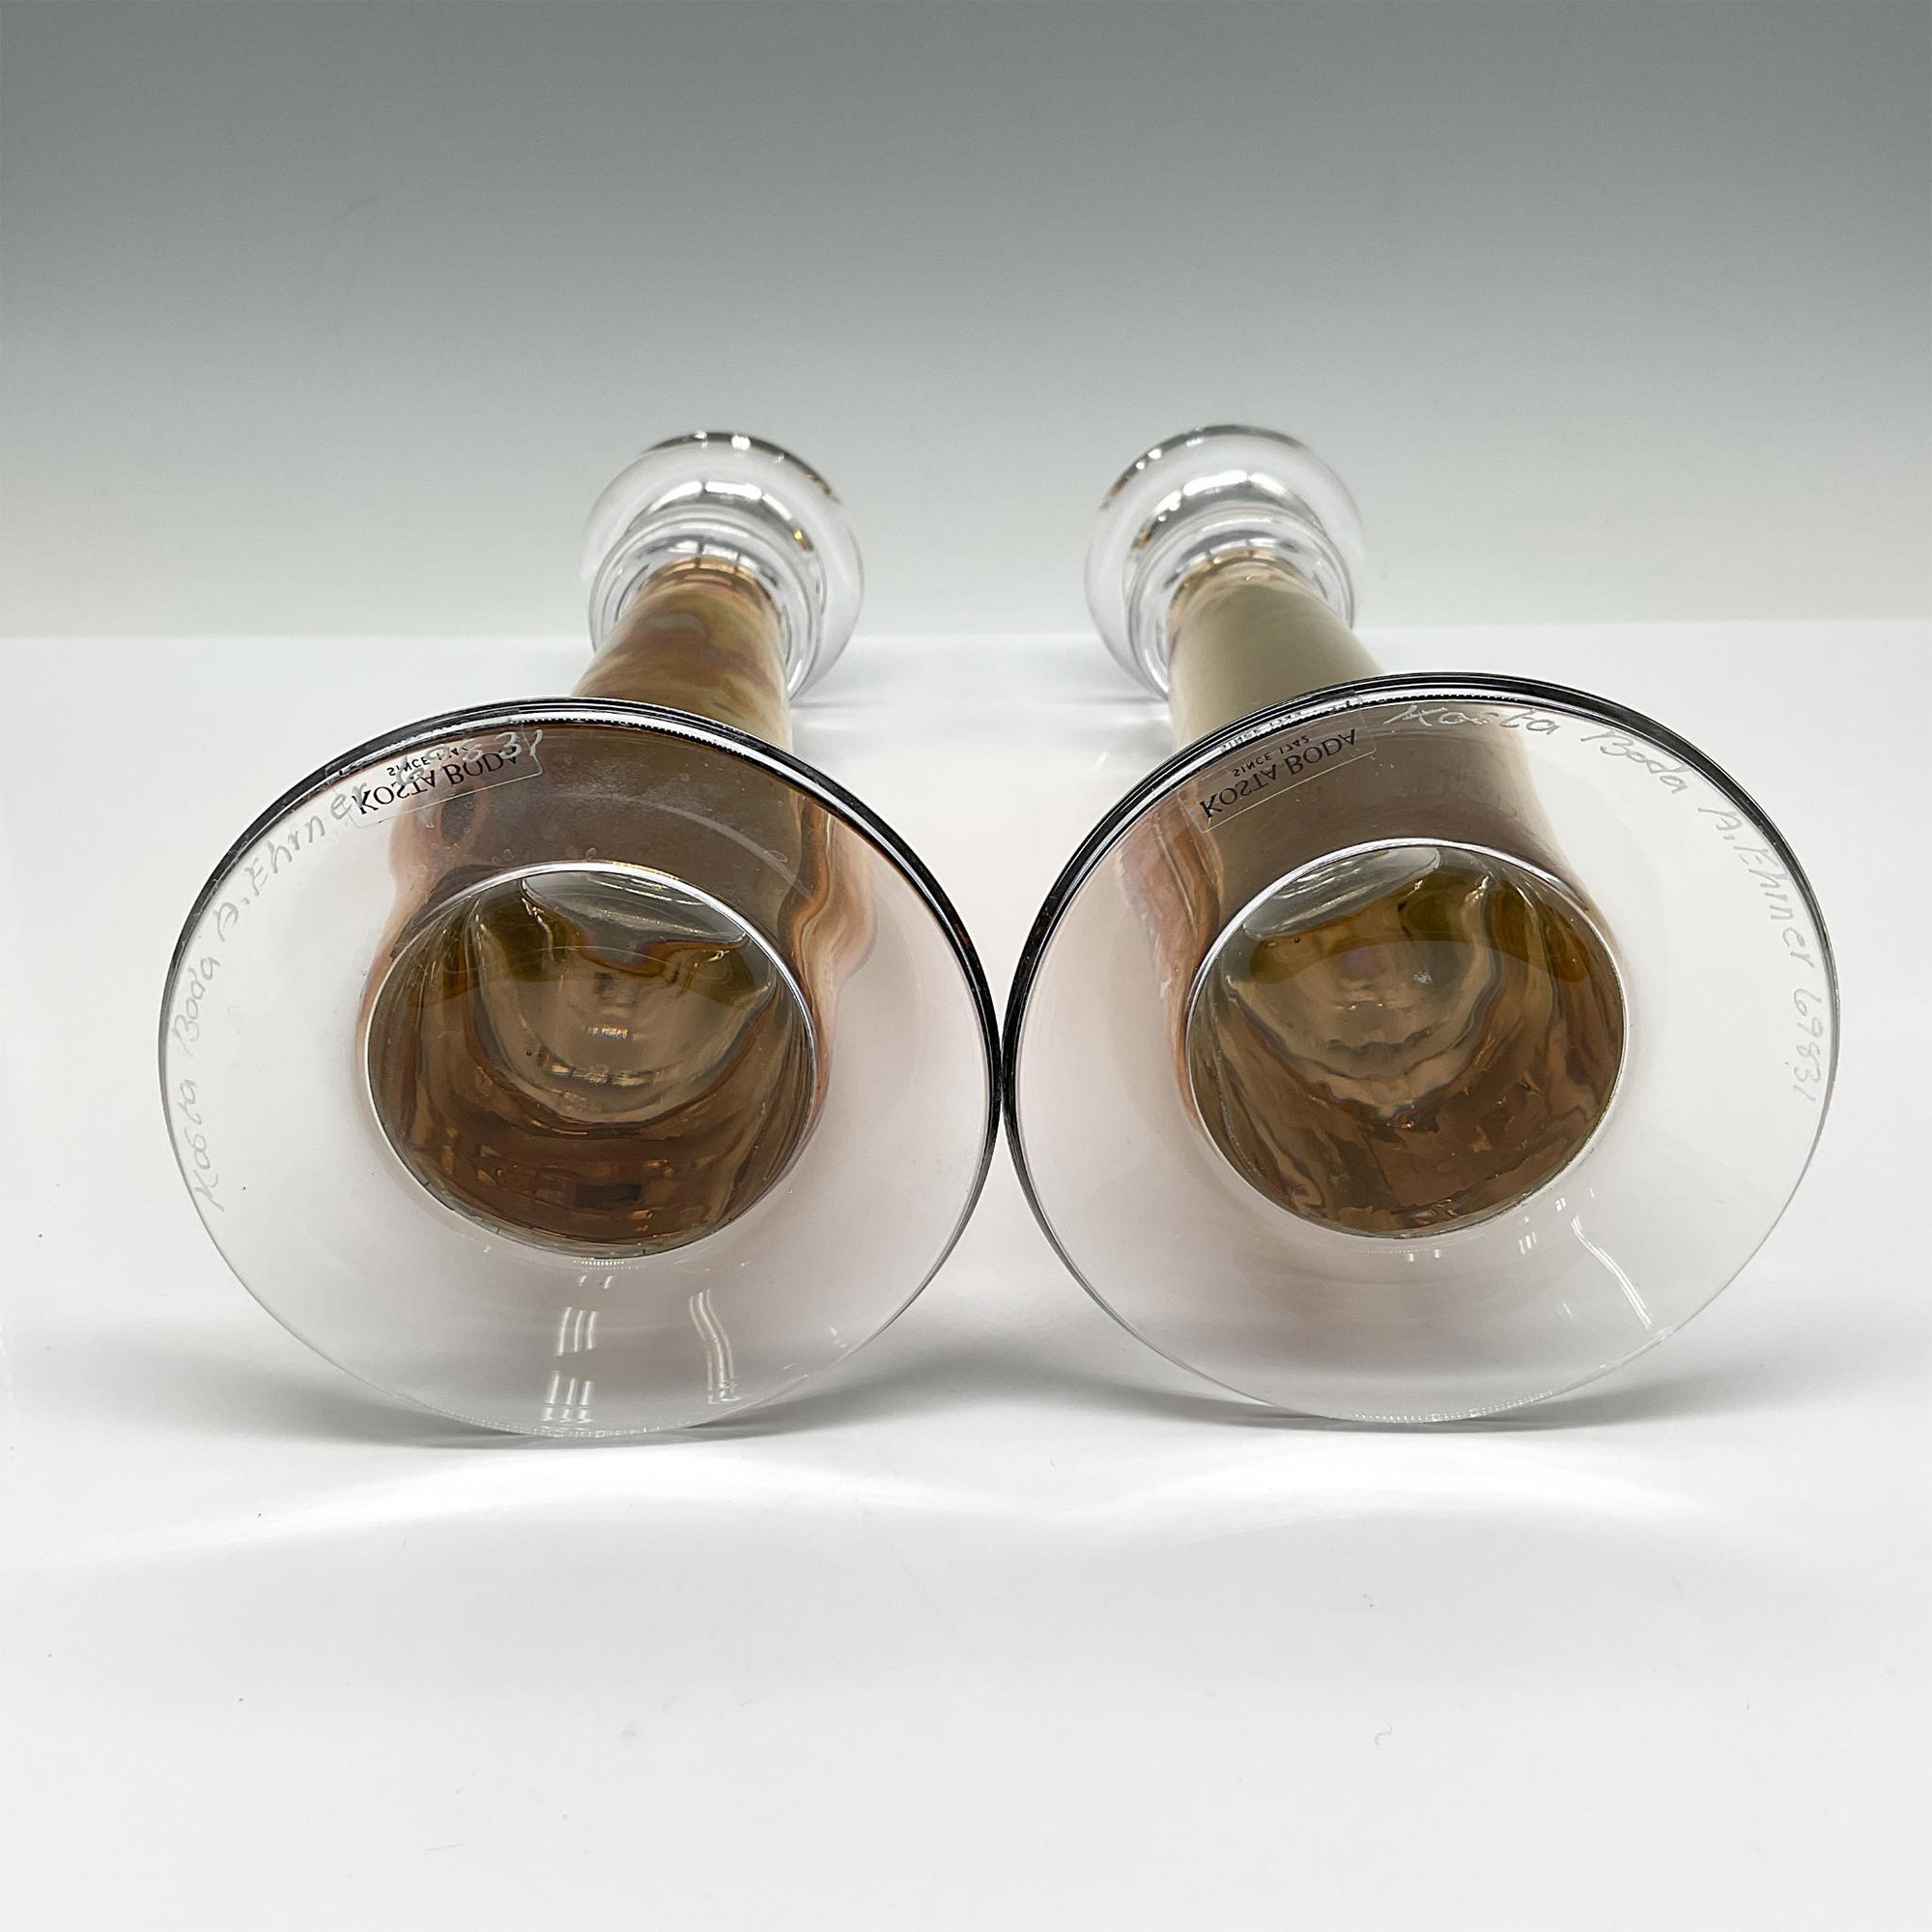 Pair of Kosta Boda Pillar Candle Holders, Signed - Image 3 of 3